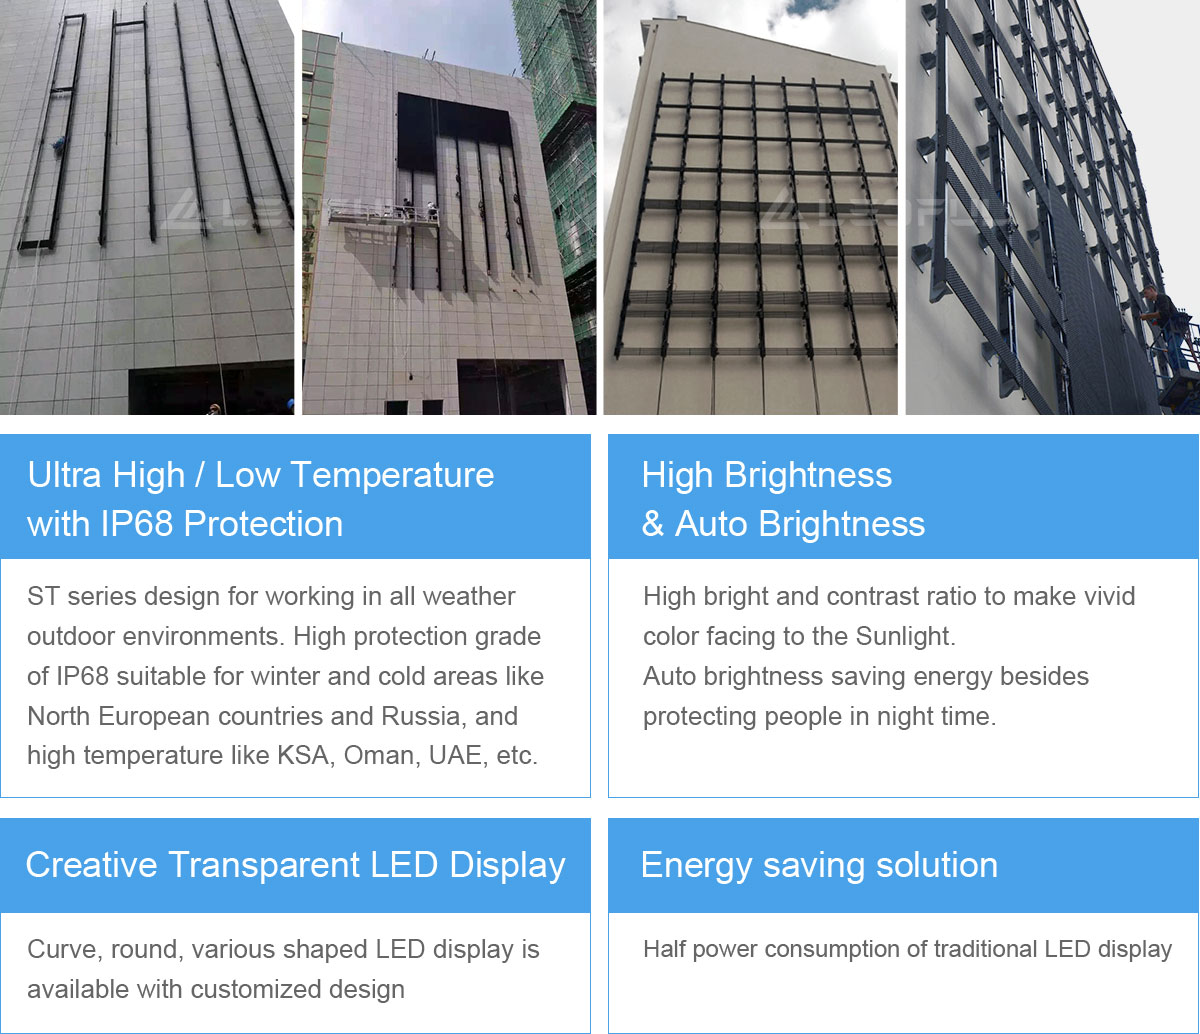 No air conditioner, no structure,  no rear space during strip transparent LED display installation